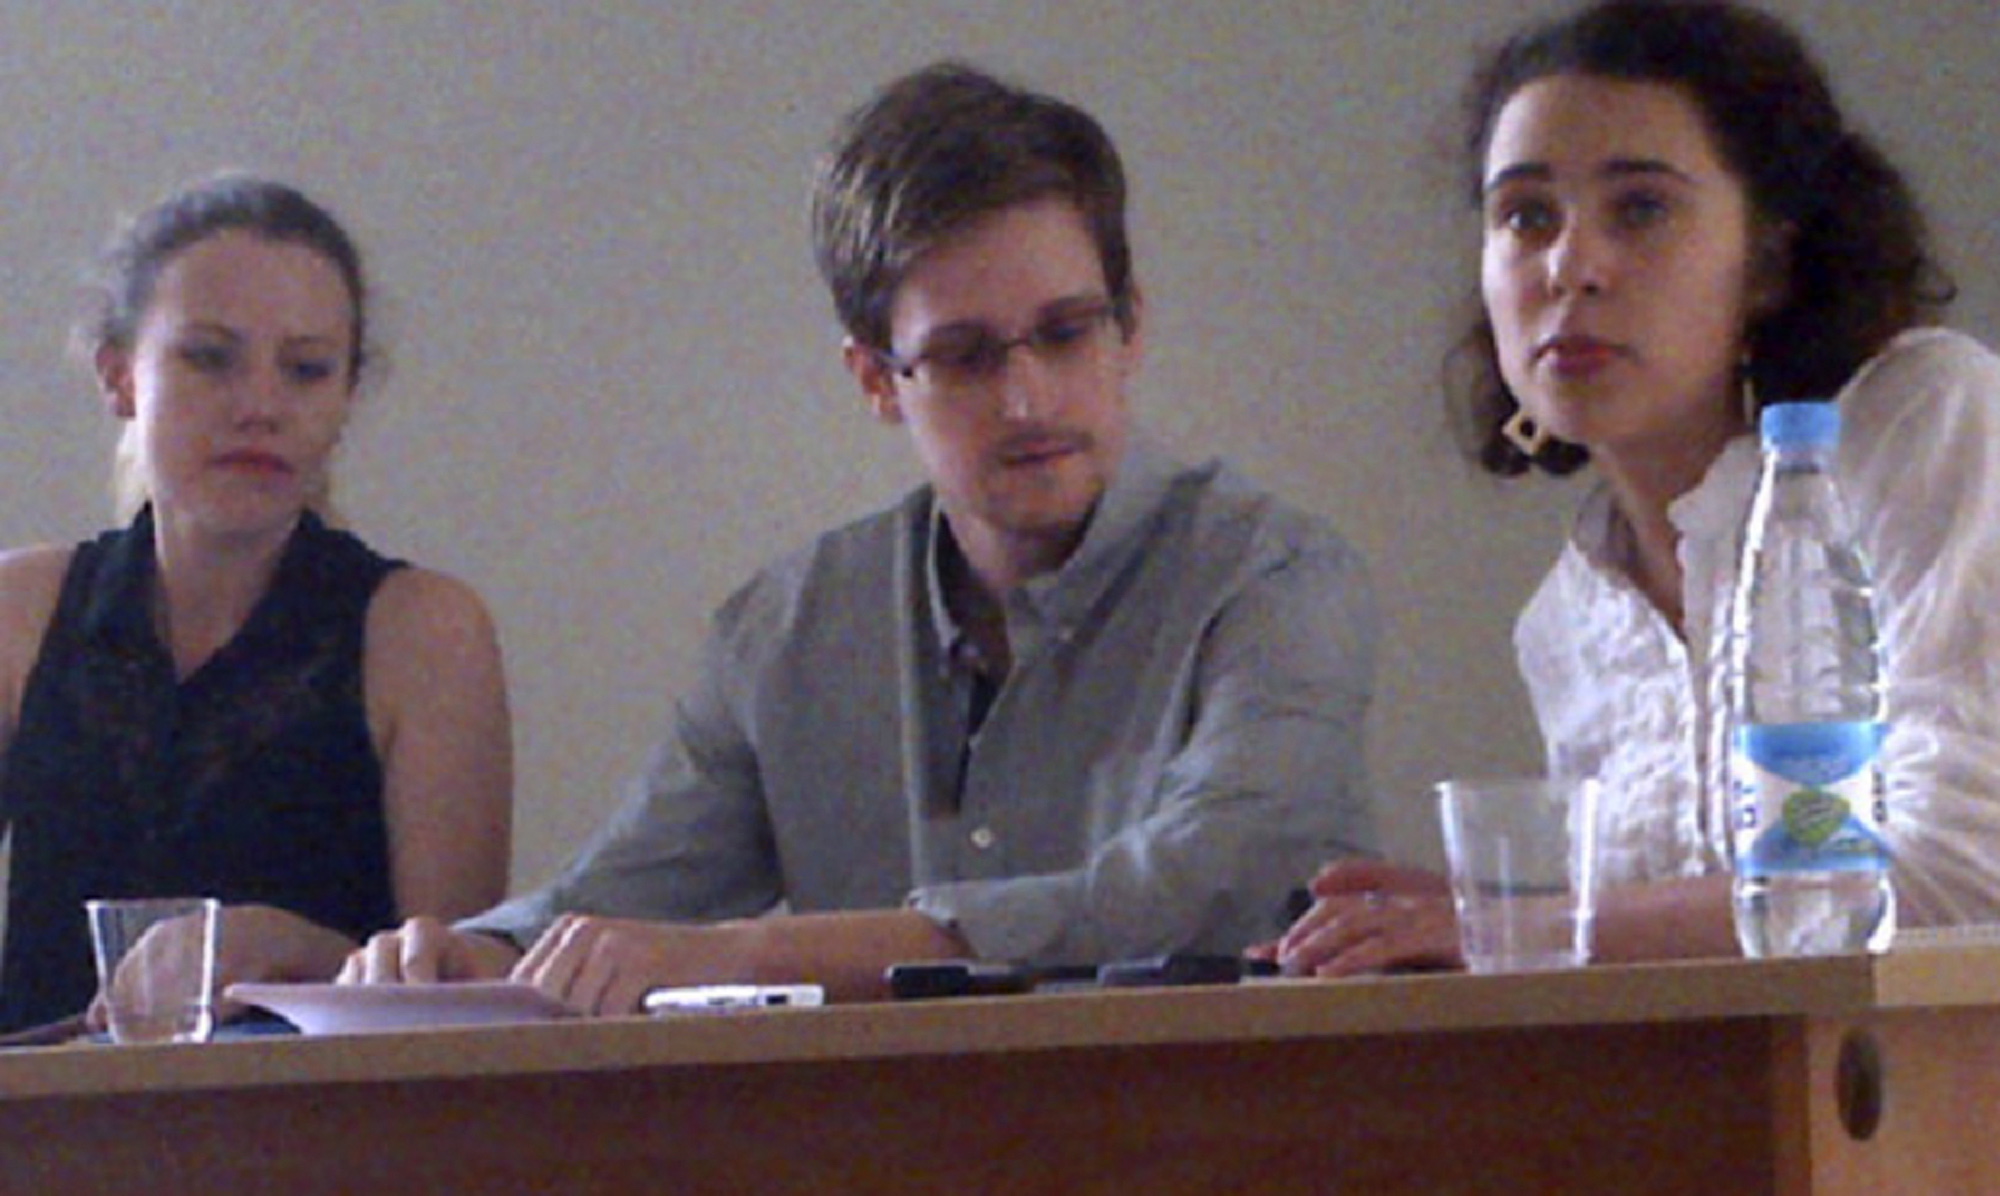 NSA leaker Edward Snowden, center, attends a news conference at Moscow's Sheremetyevo Airport with Sarah Harrison of WikiLeaks, left, on Friday.